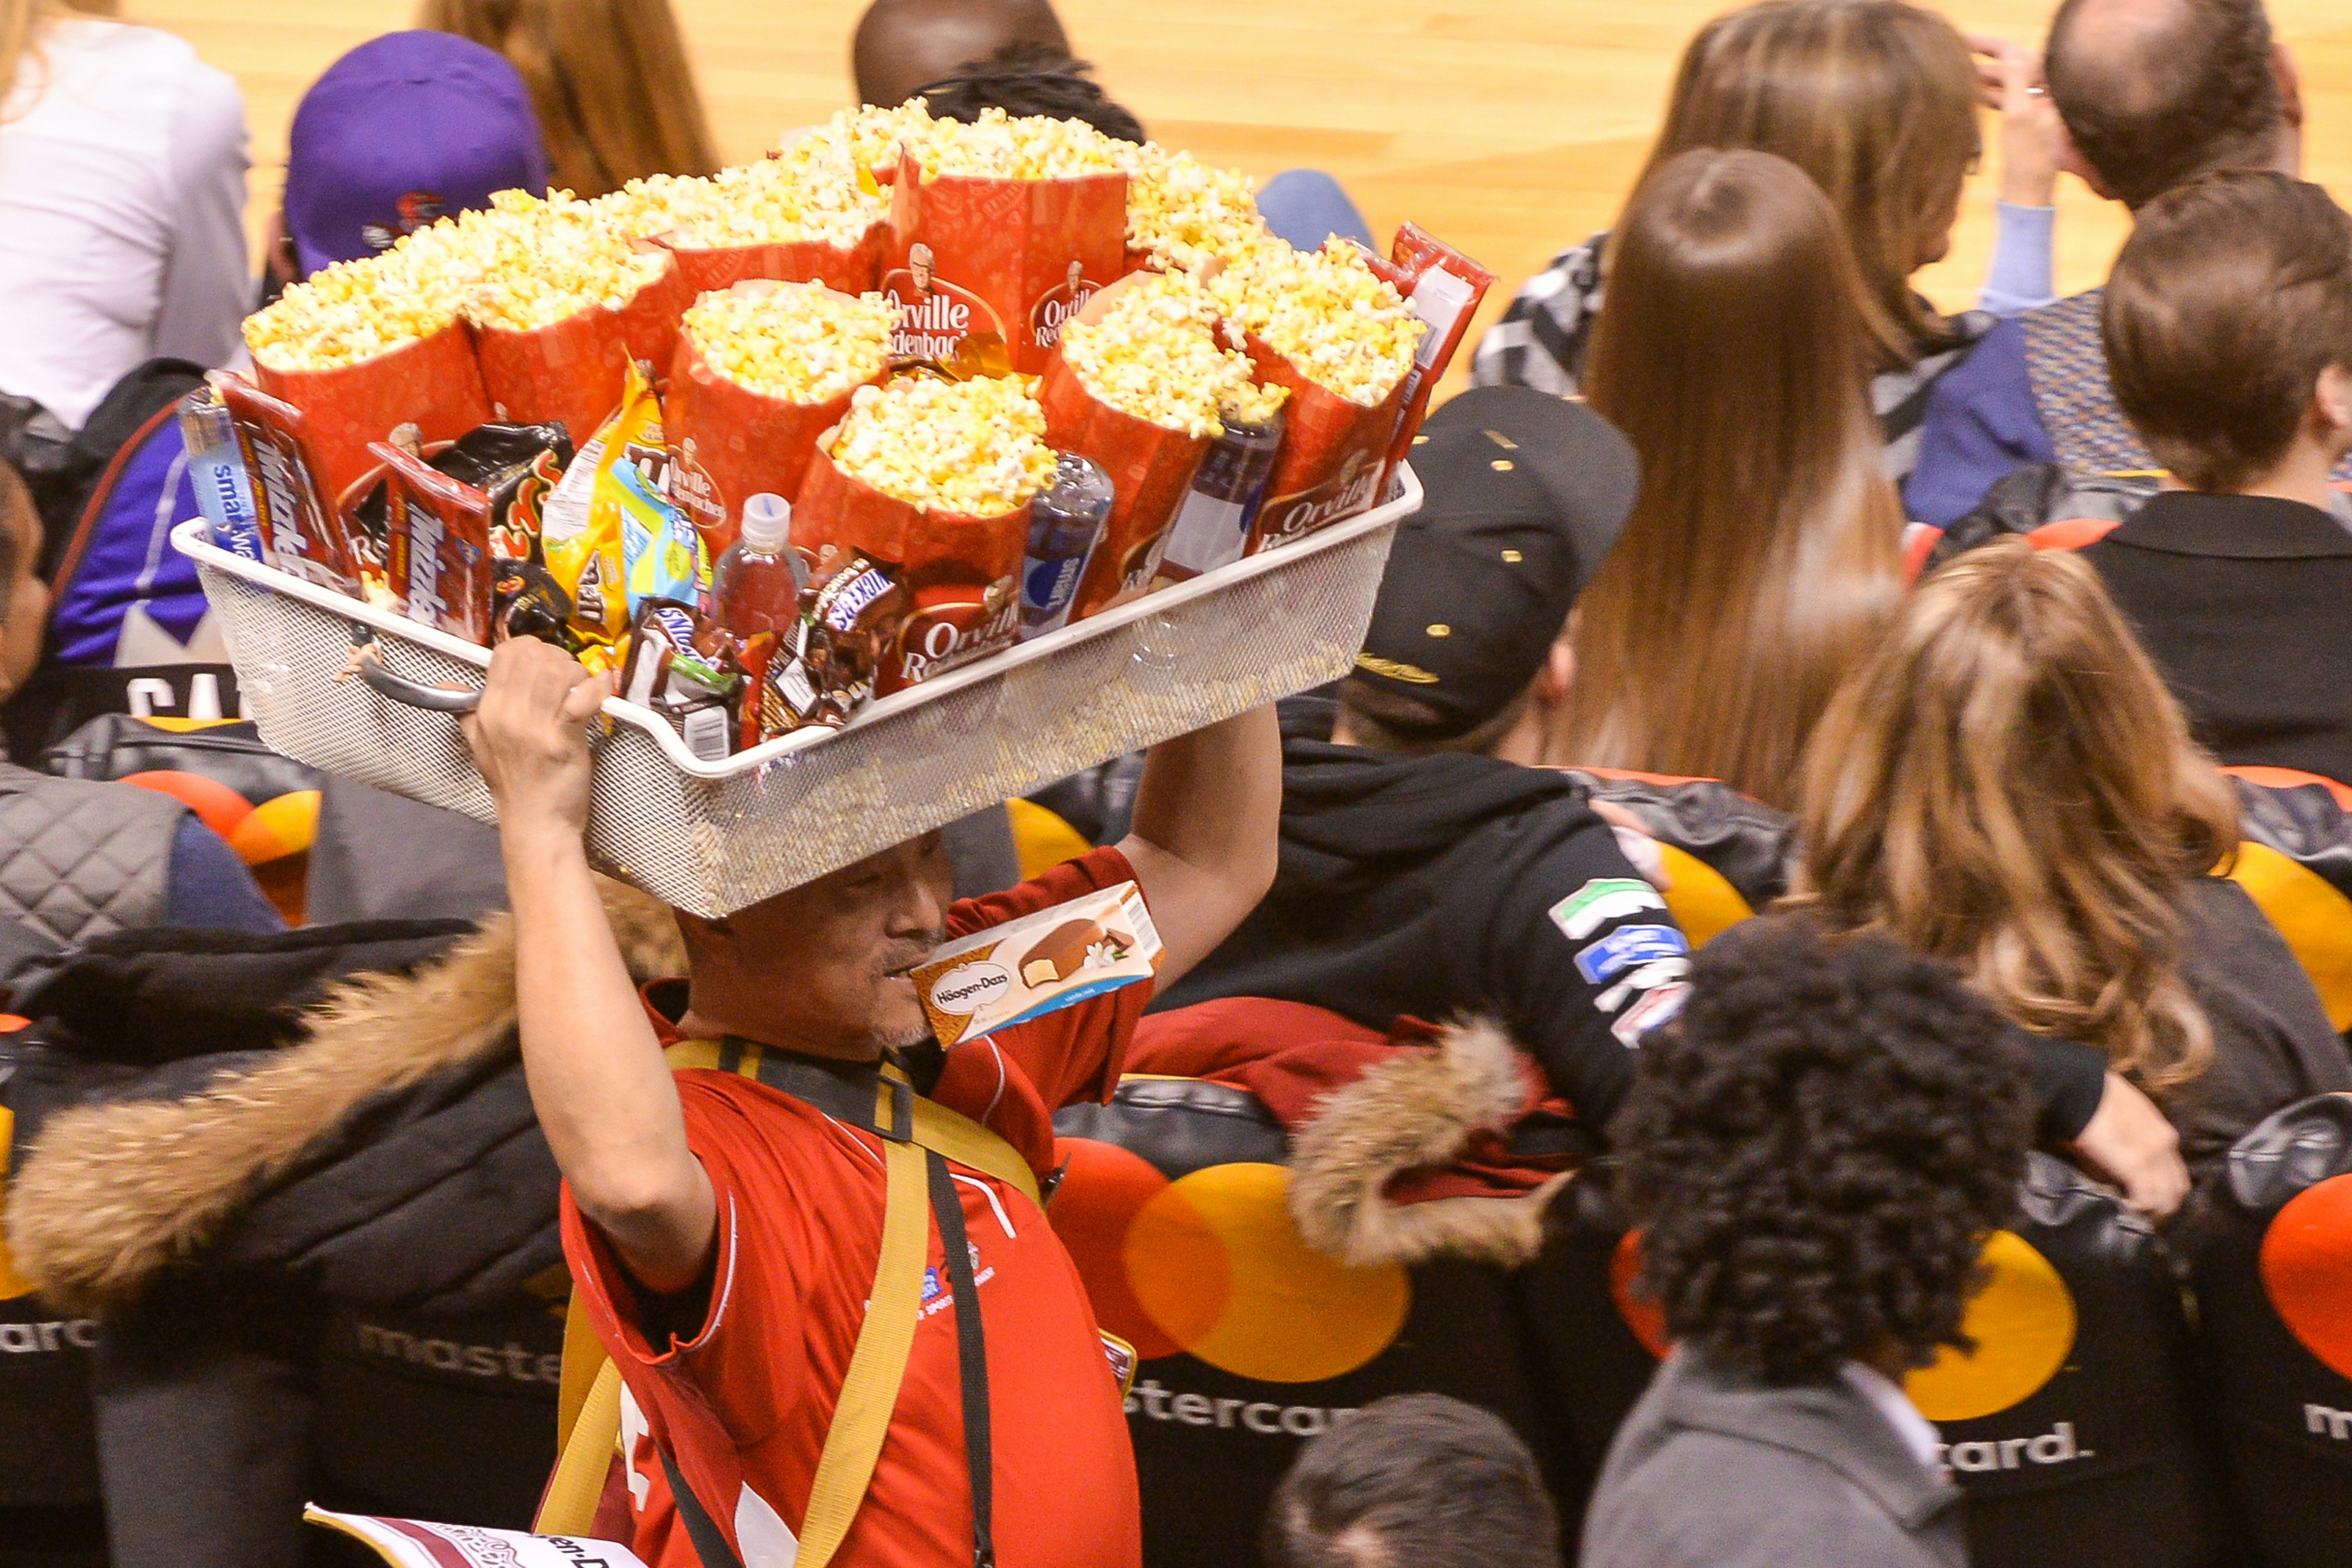 vendor carrying tub full of popcorn and candy on his head at an NBA game